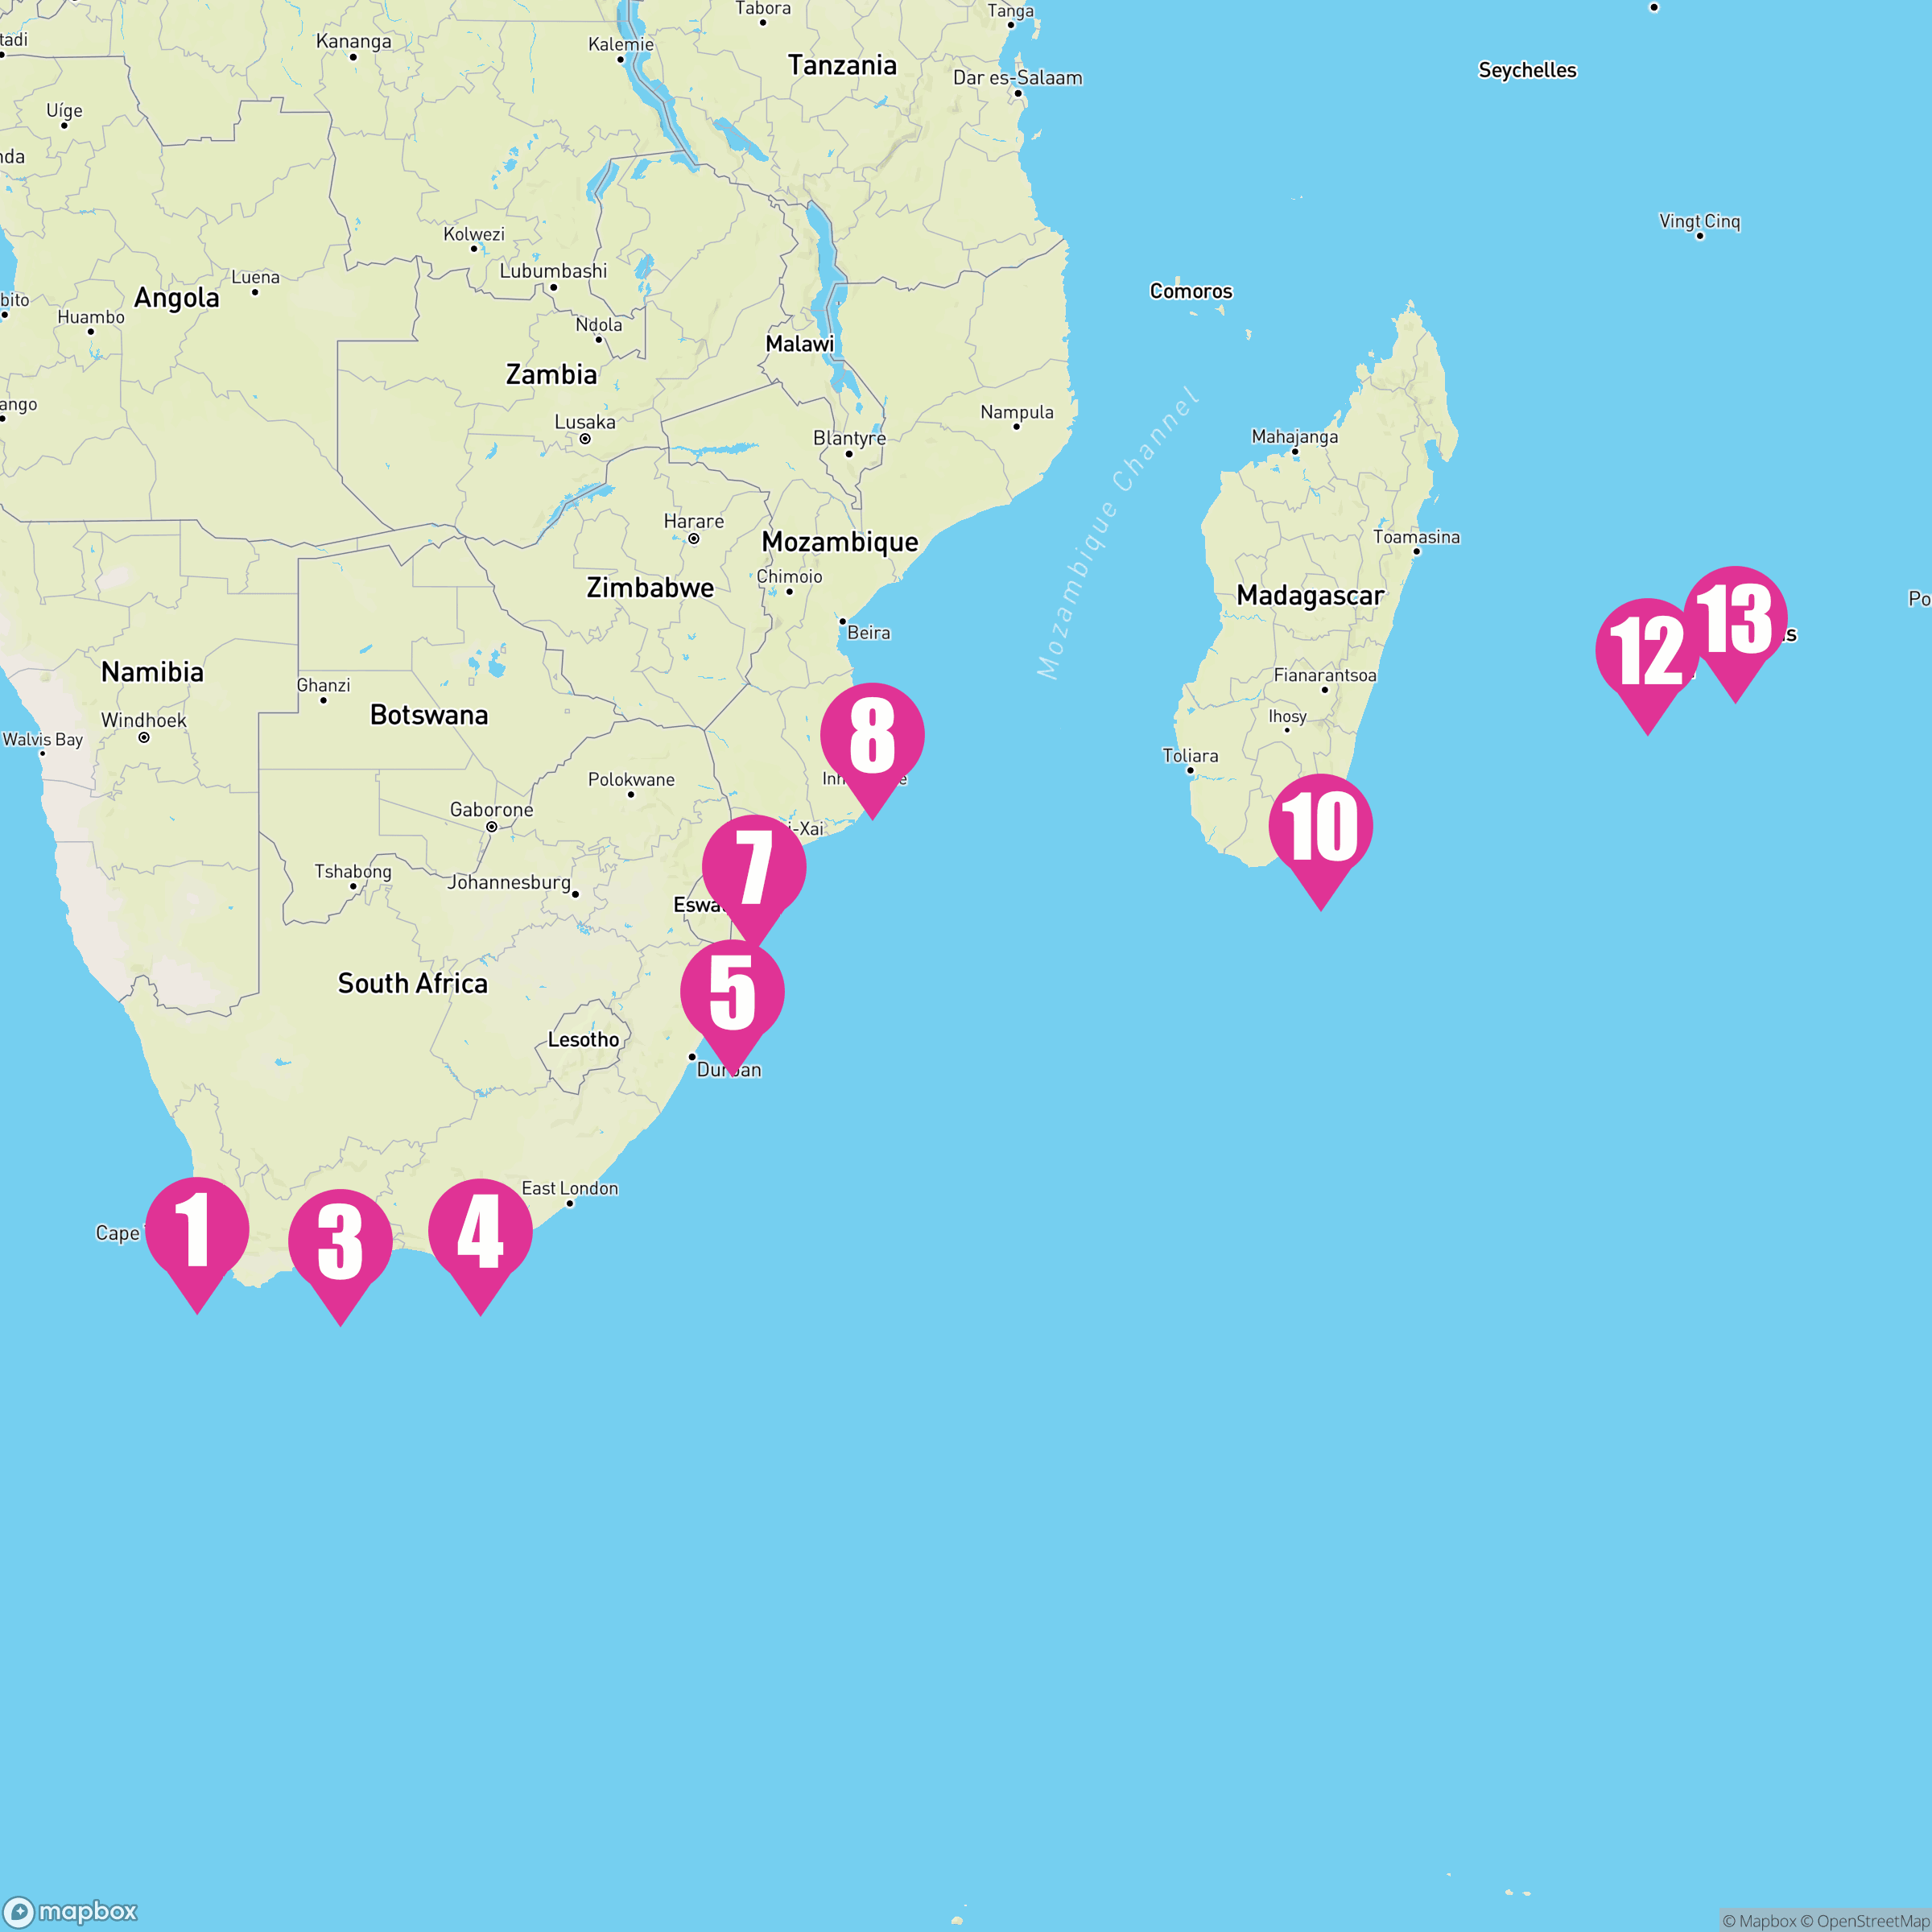 Explore South Africa - My Cruises